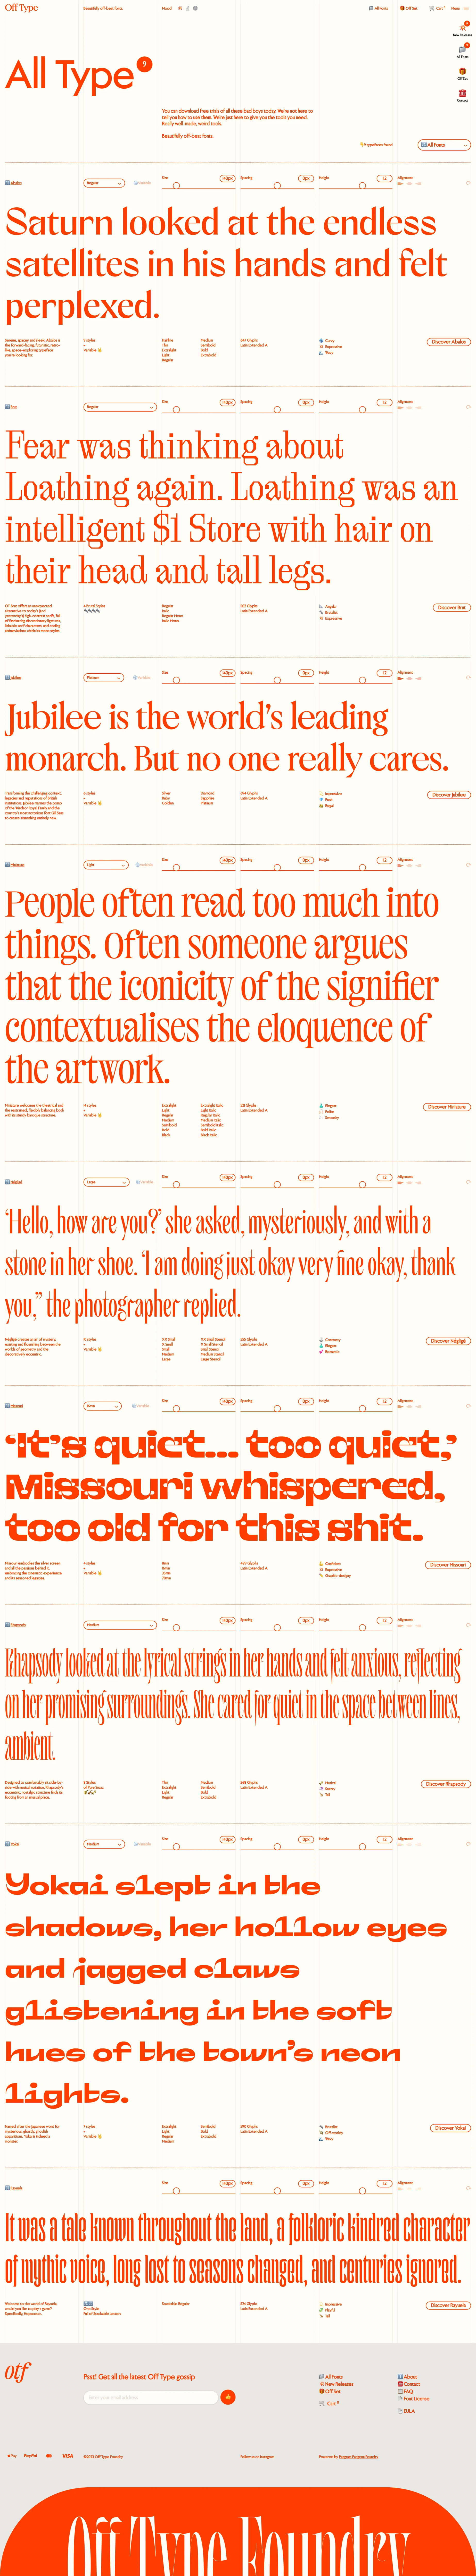 Off Type Foundry Landing Page Example: Welcome to Off Type! A place to explore beautifully off-beat fonts that are really really well made, meaning that whatever the context you put them in, they’ll work as hard as they look wonderfully weird. All Fonts are Free to try!